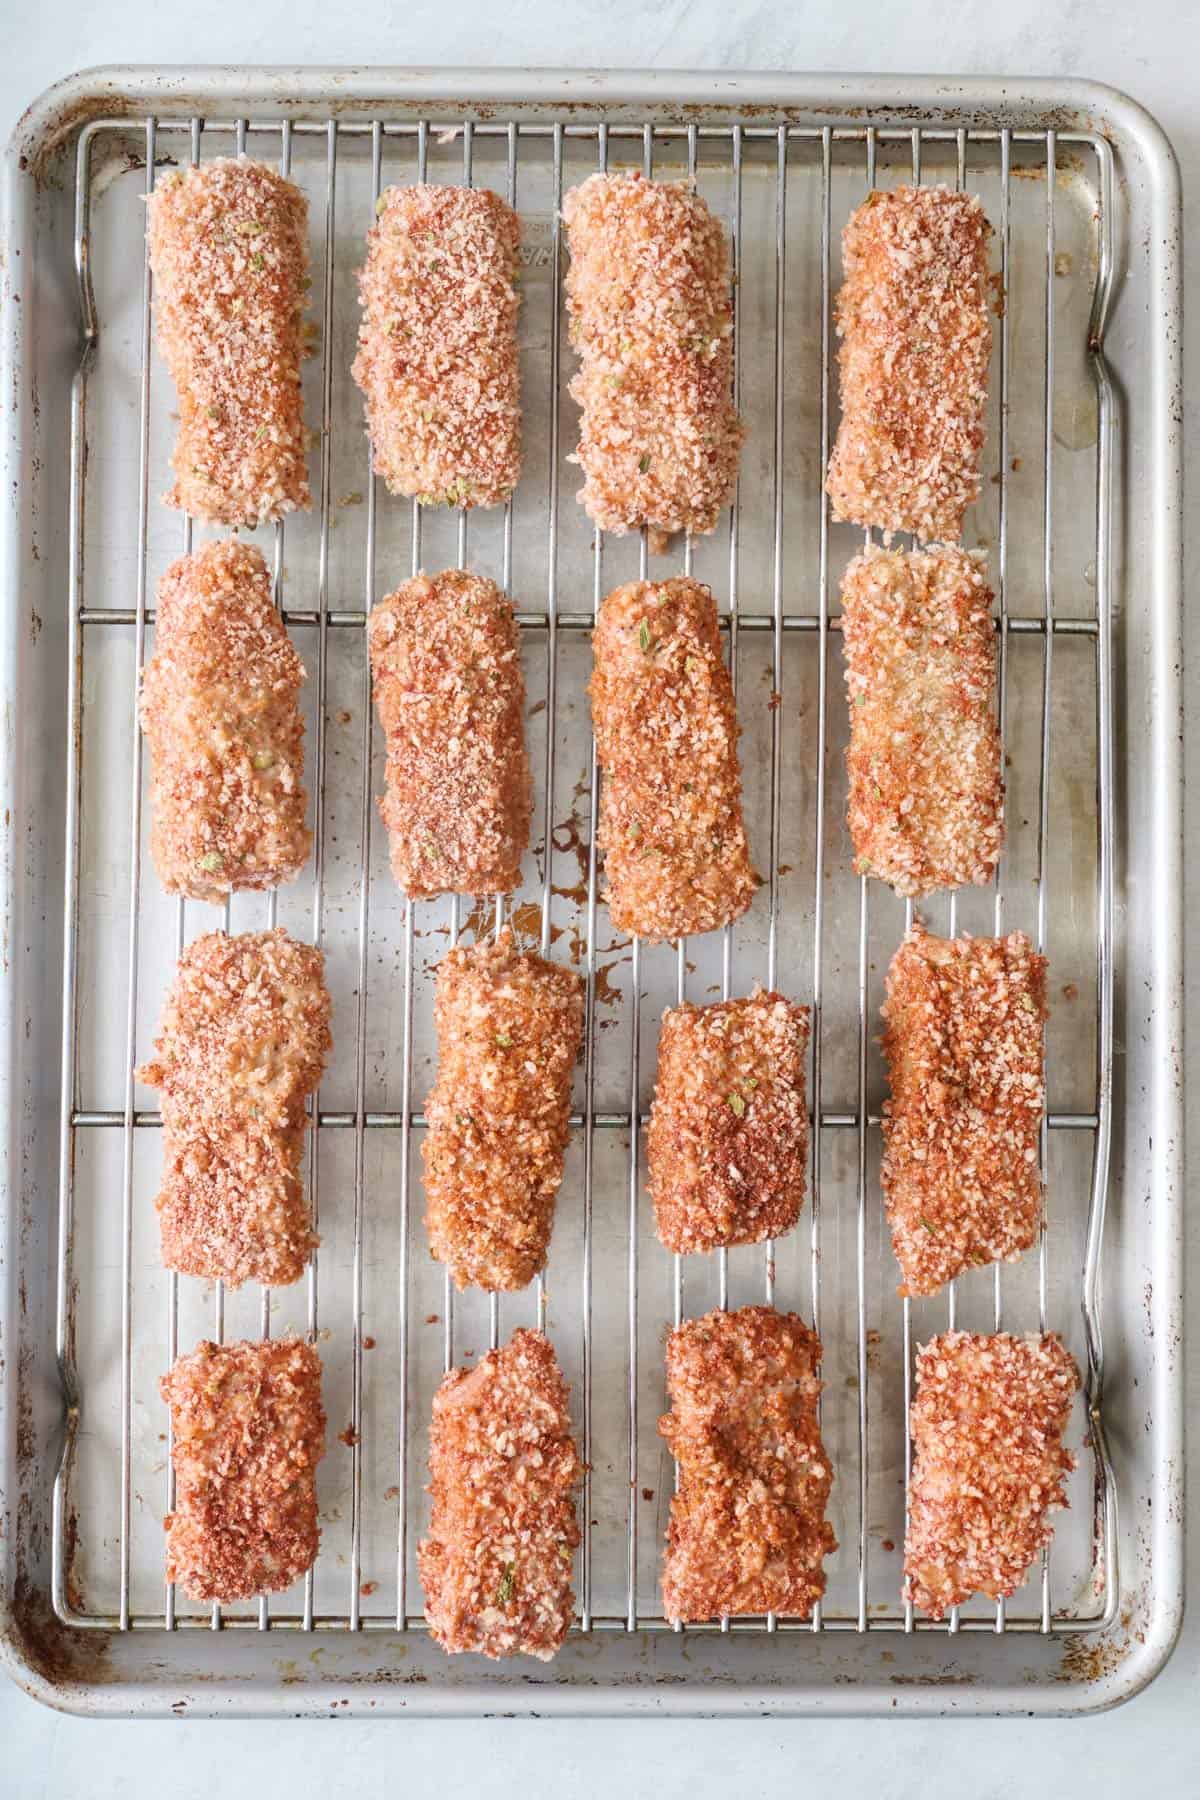 Breaded salmon pieces on a wire rack on top of a sheet pan before baking.